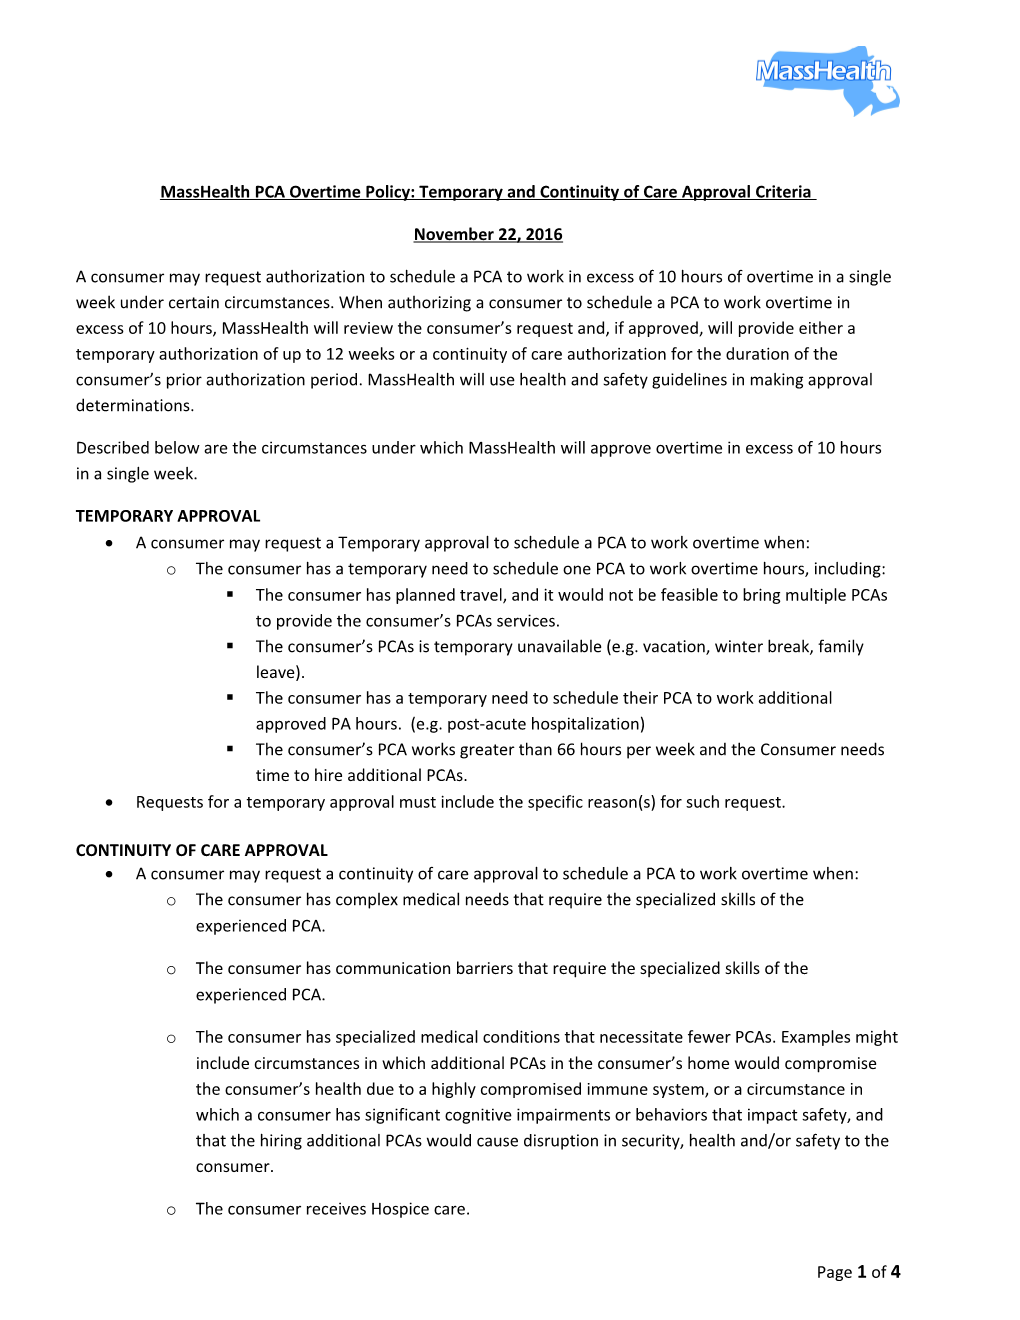 Masshealth PCA Overtime Policy: Temporary and Continuity of Care Approval Criteria